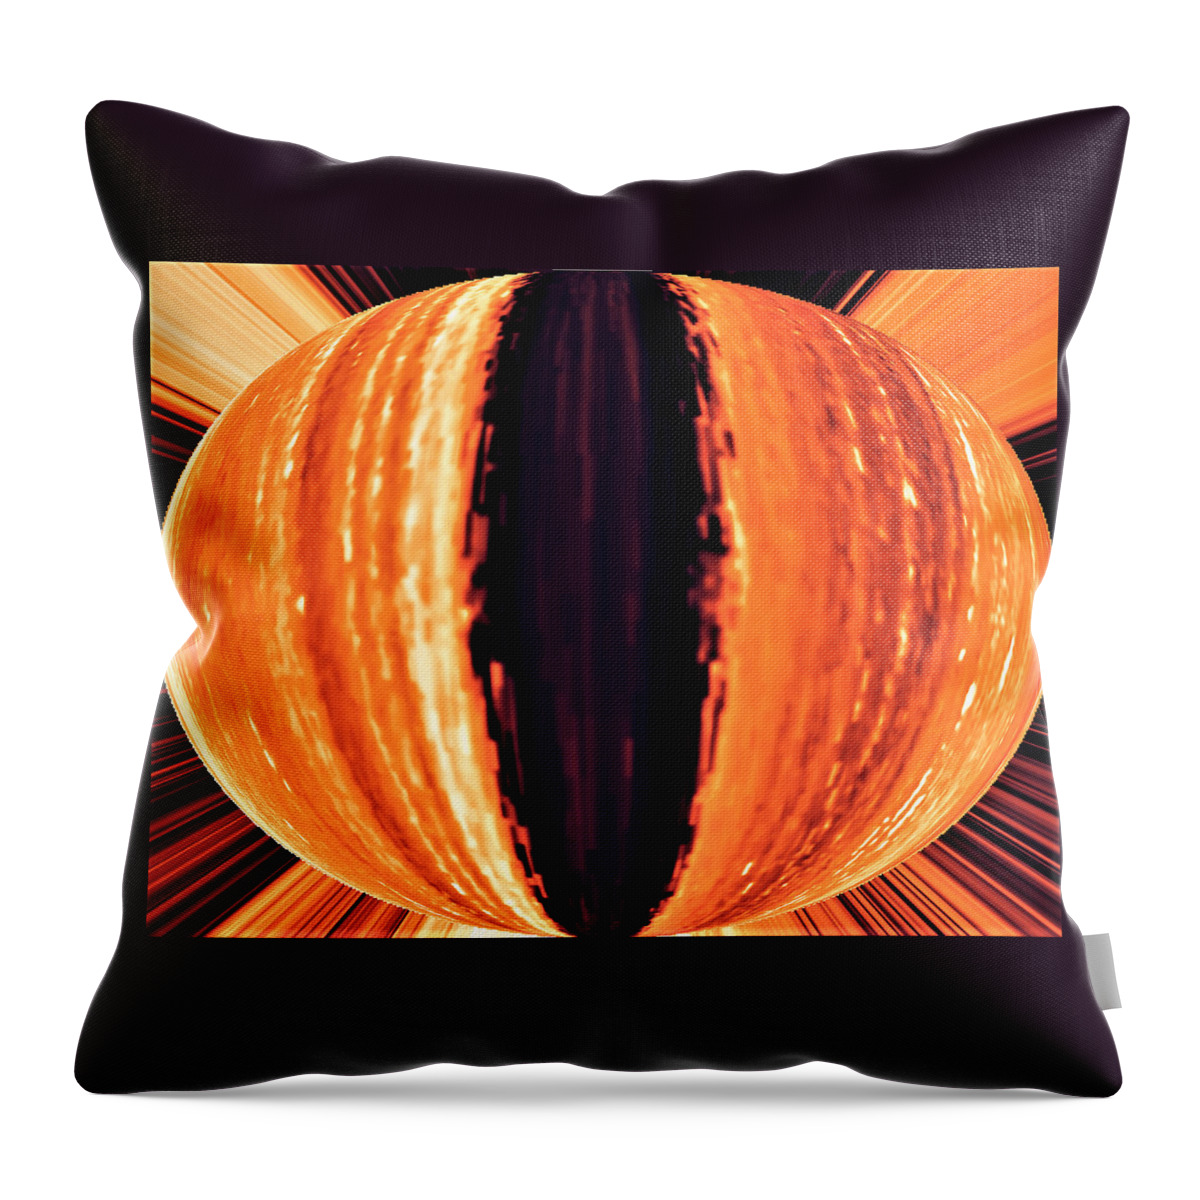 Tiger Eye Throw Pillow featuring the digital art Tiger's Eye by Ronald Mills